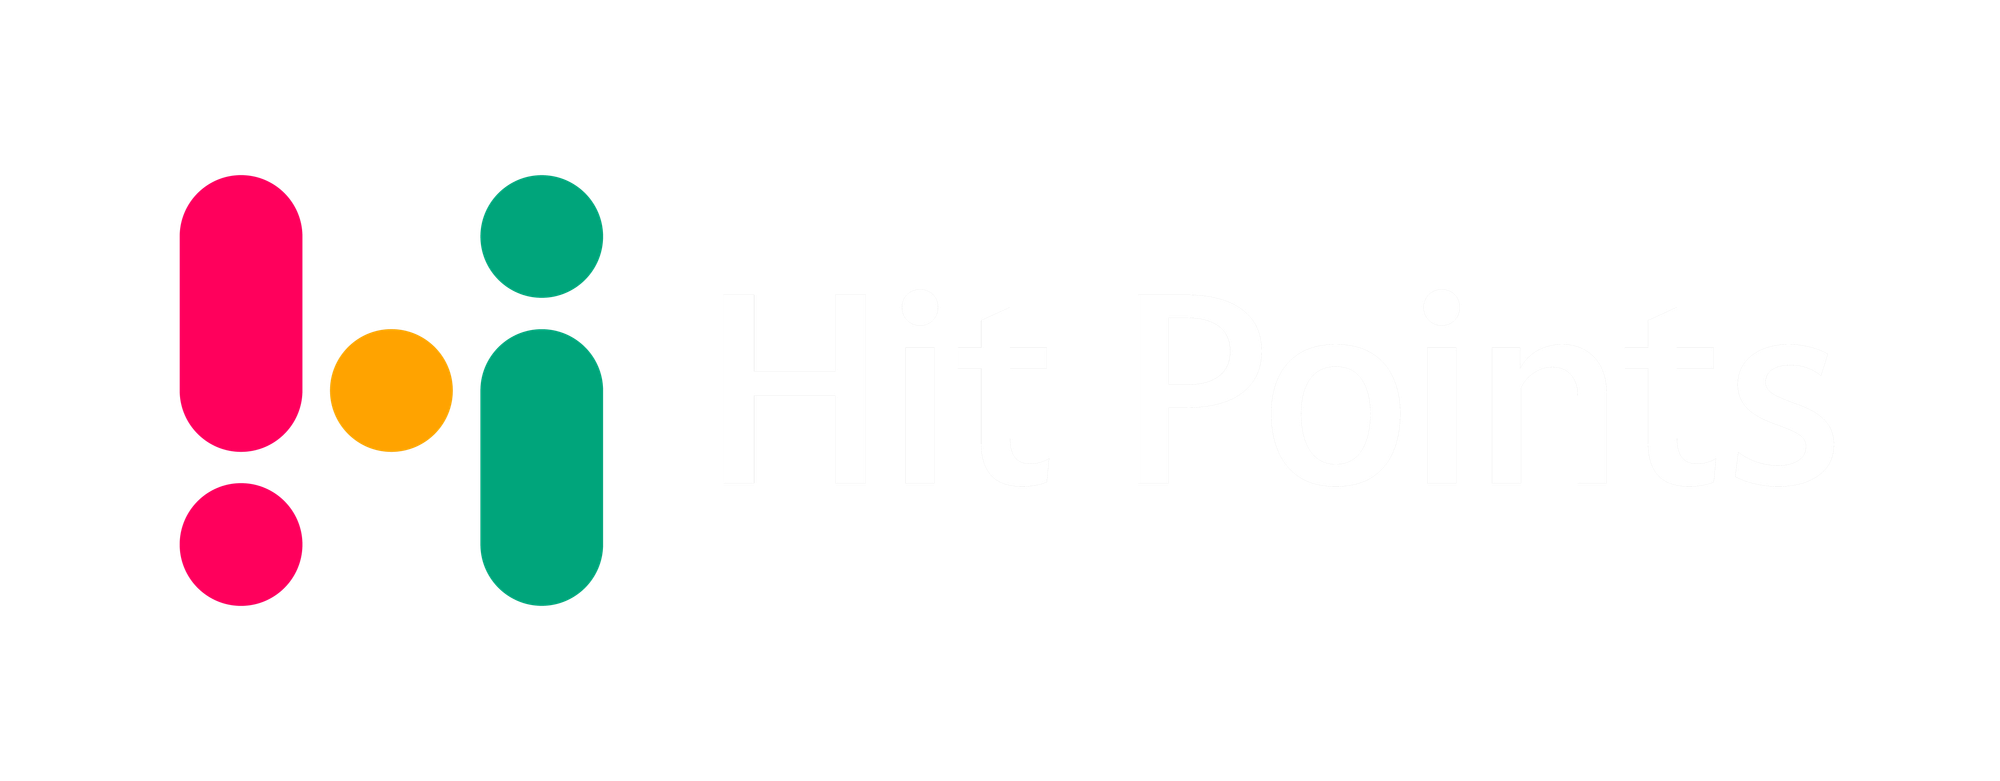 Hit Points by Nathan Brown